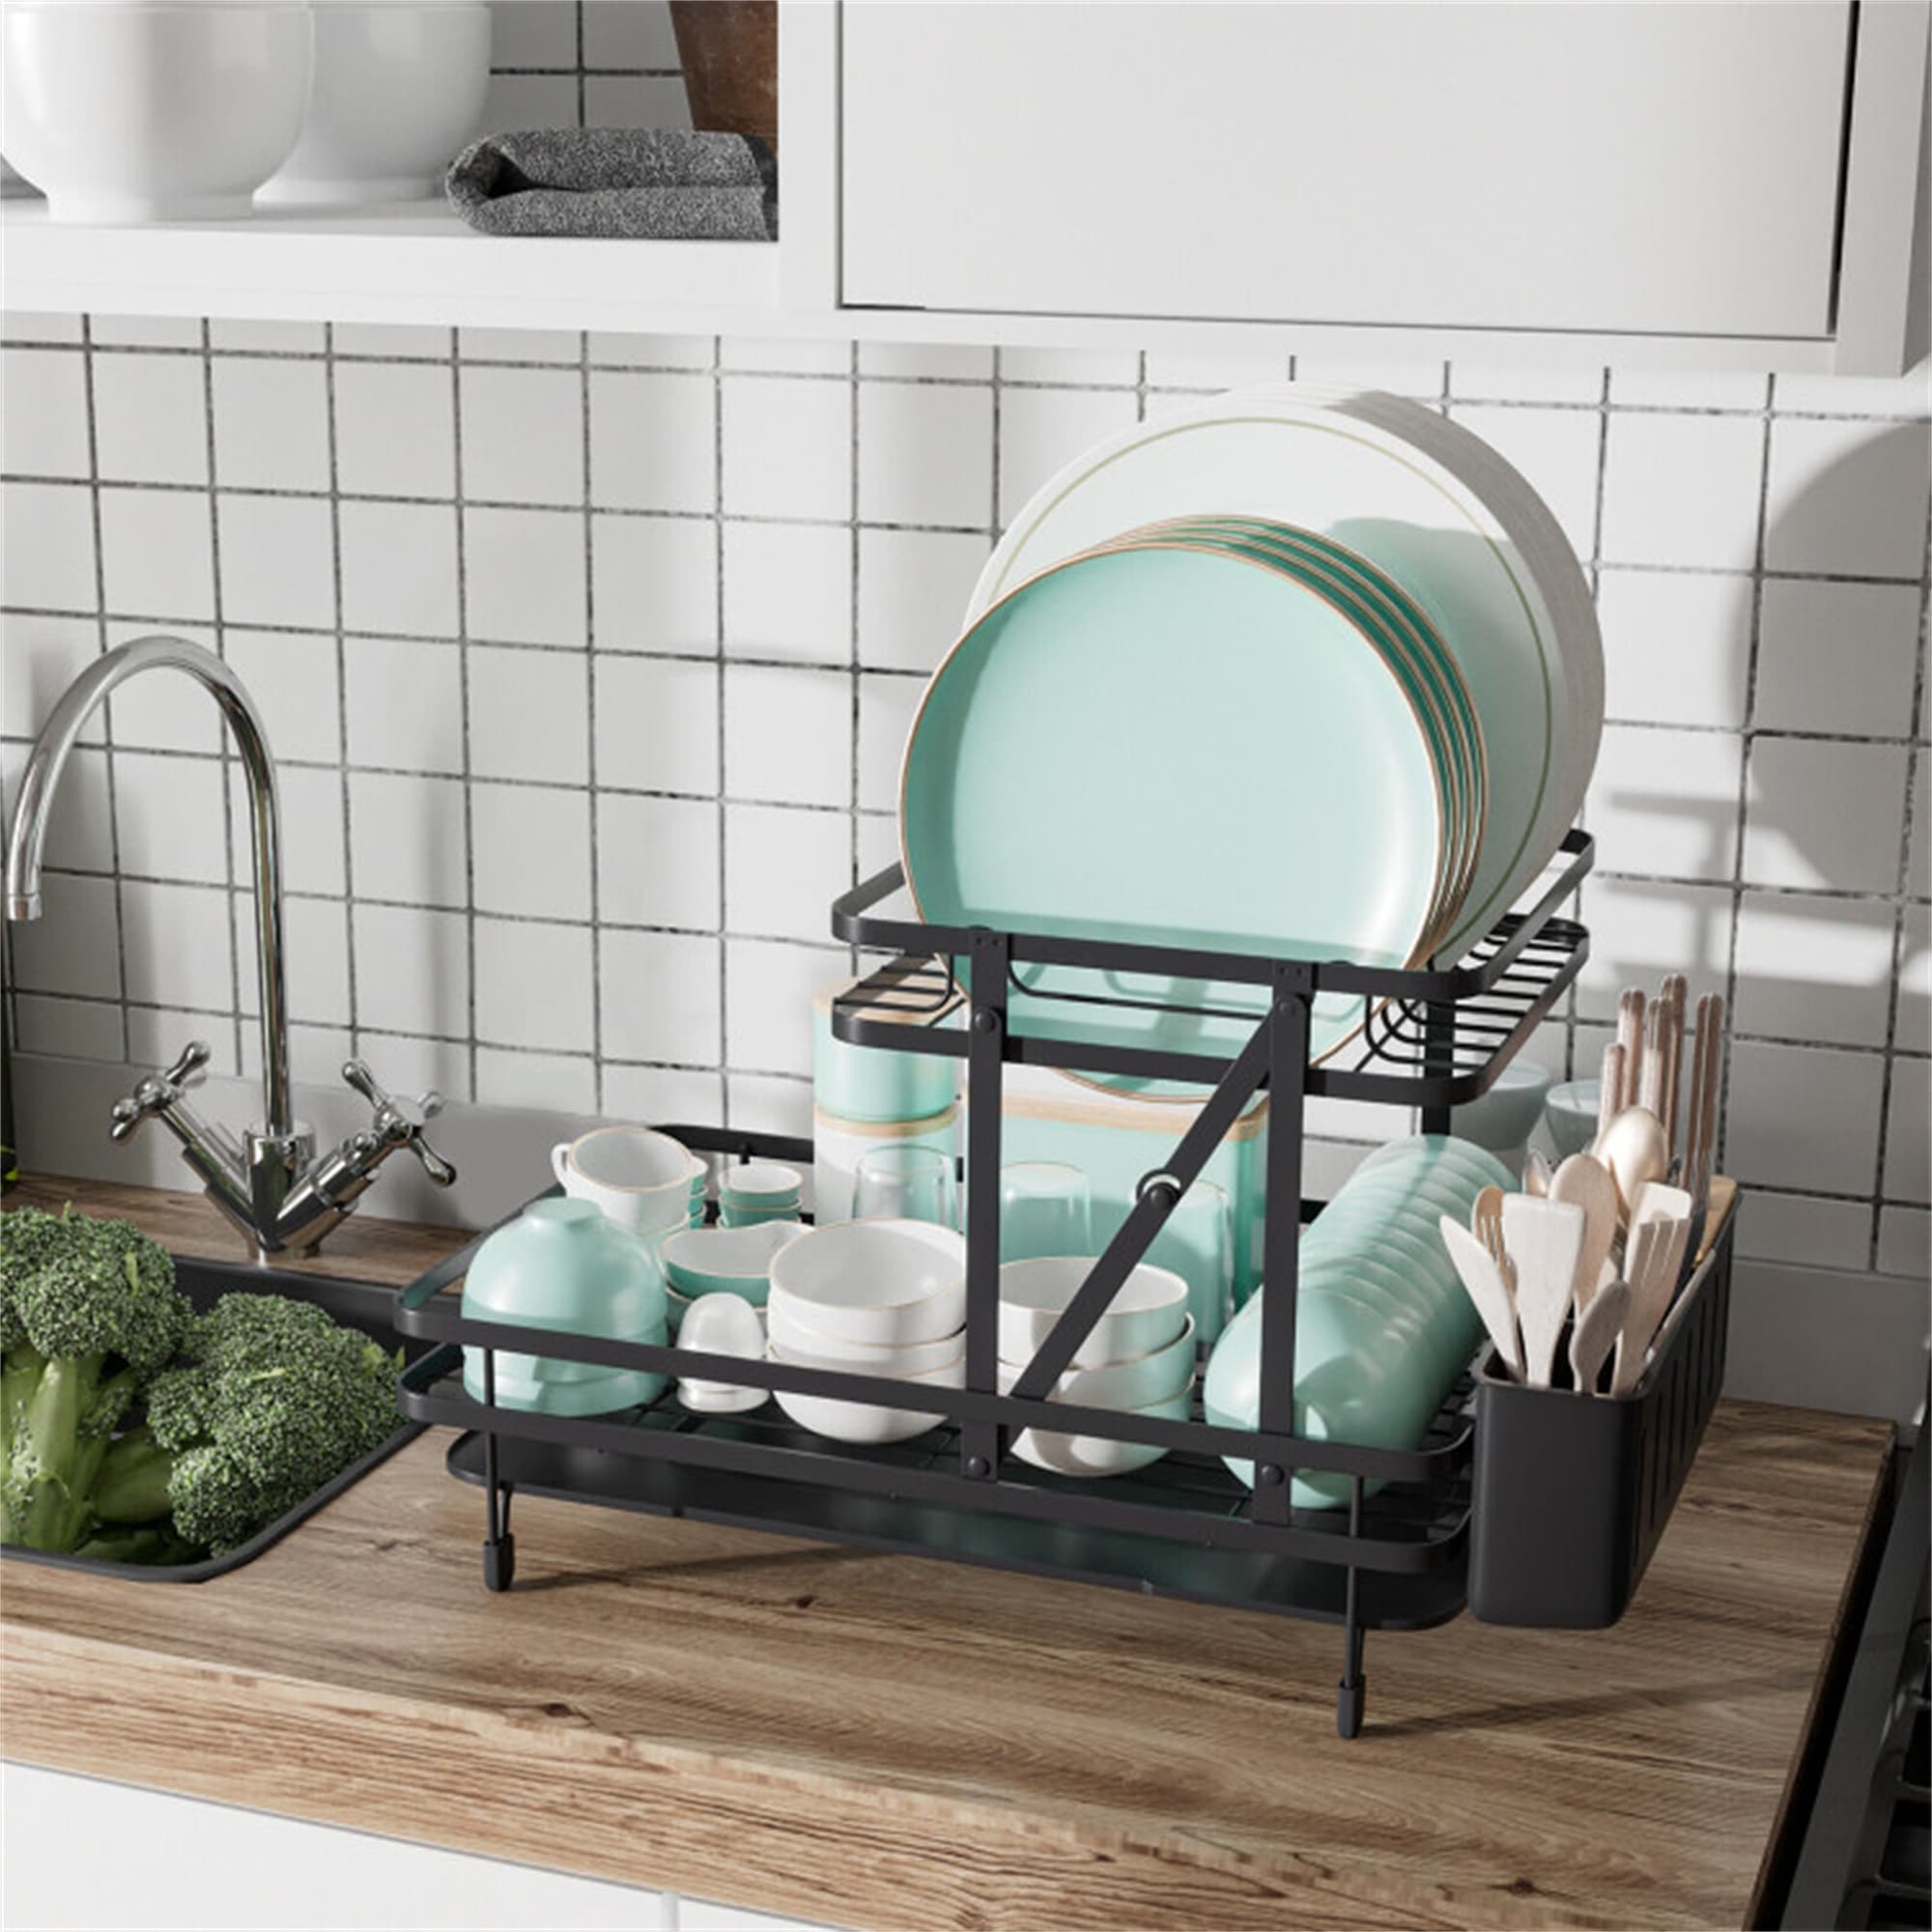 https://ak1.ostkcdn.com/images/products/is/images/direct/2d33c8990ddc4c98f843e694622192b8d26ba14e/2-Tier-Collapsible-Dish-Rack-with-Removable-Drip-Tray.jpg